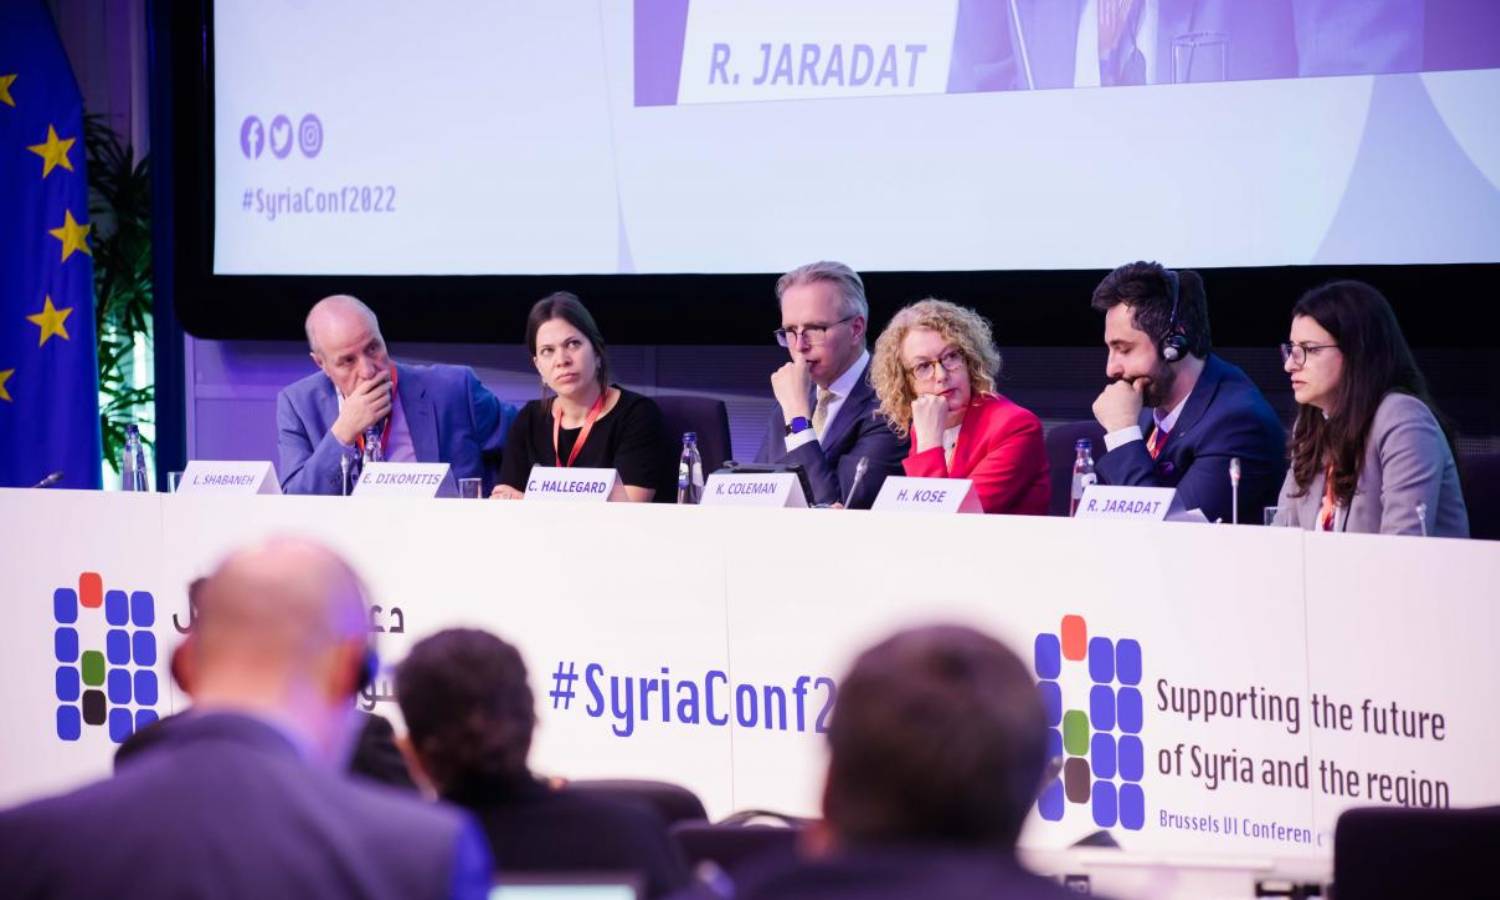 Part of the attendees at the Brussels VI Conference on supporting the future of Syria and the region (conference site)